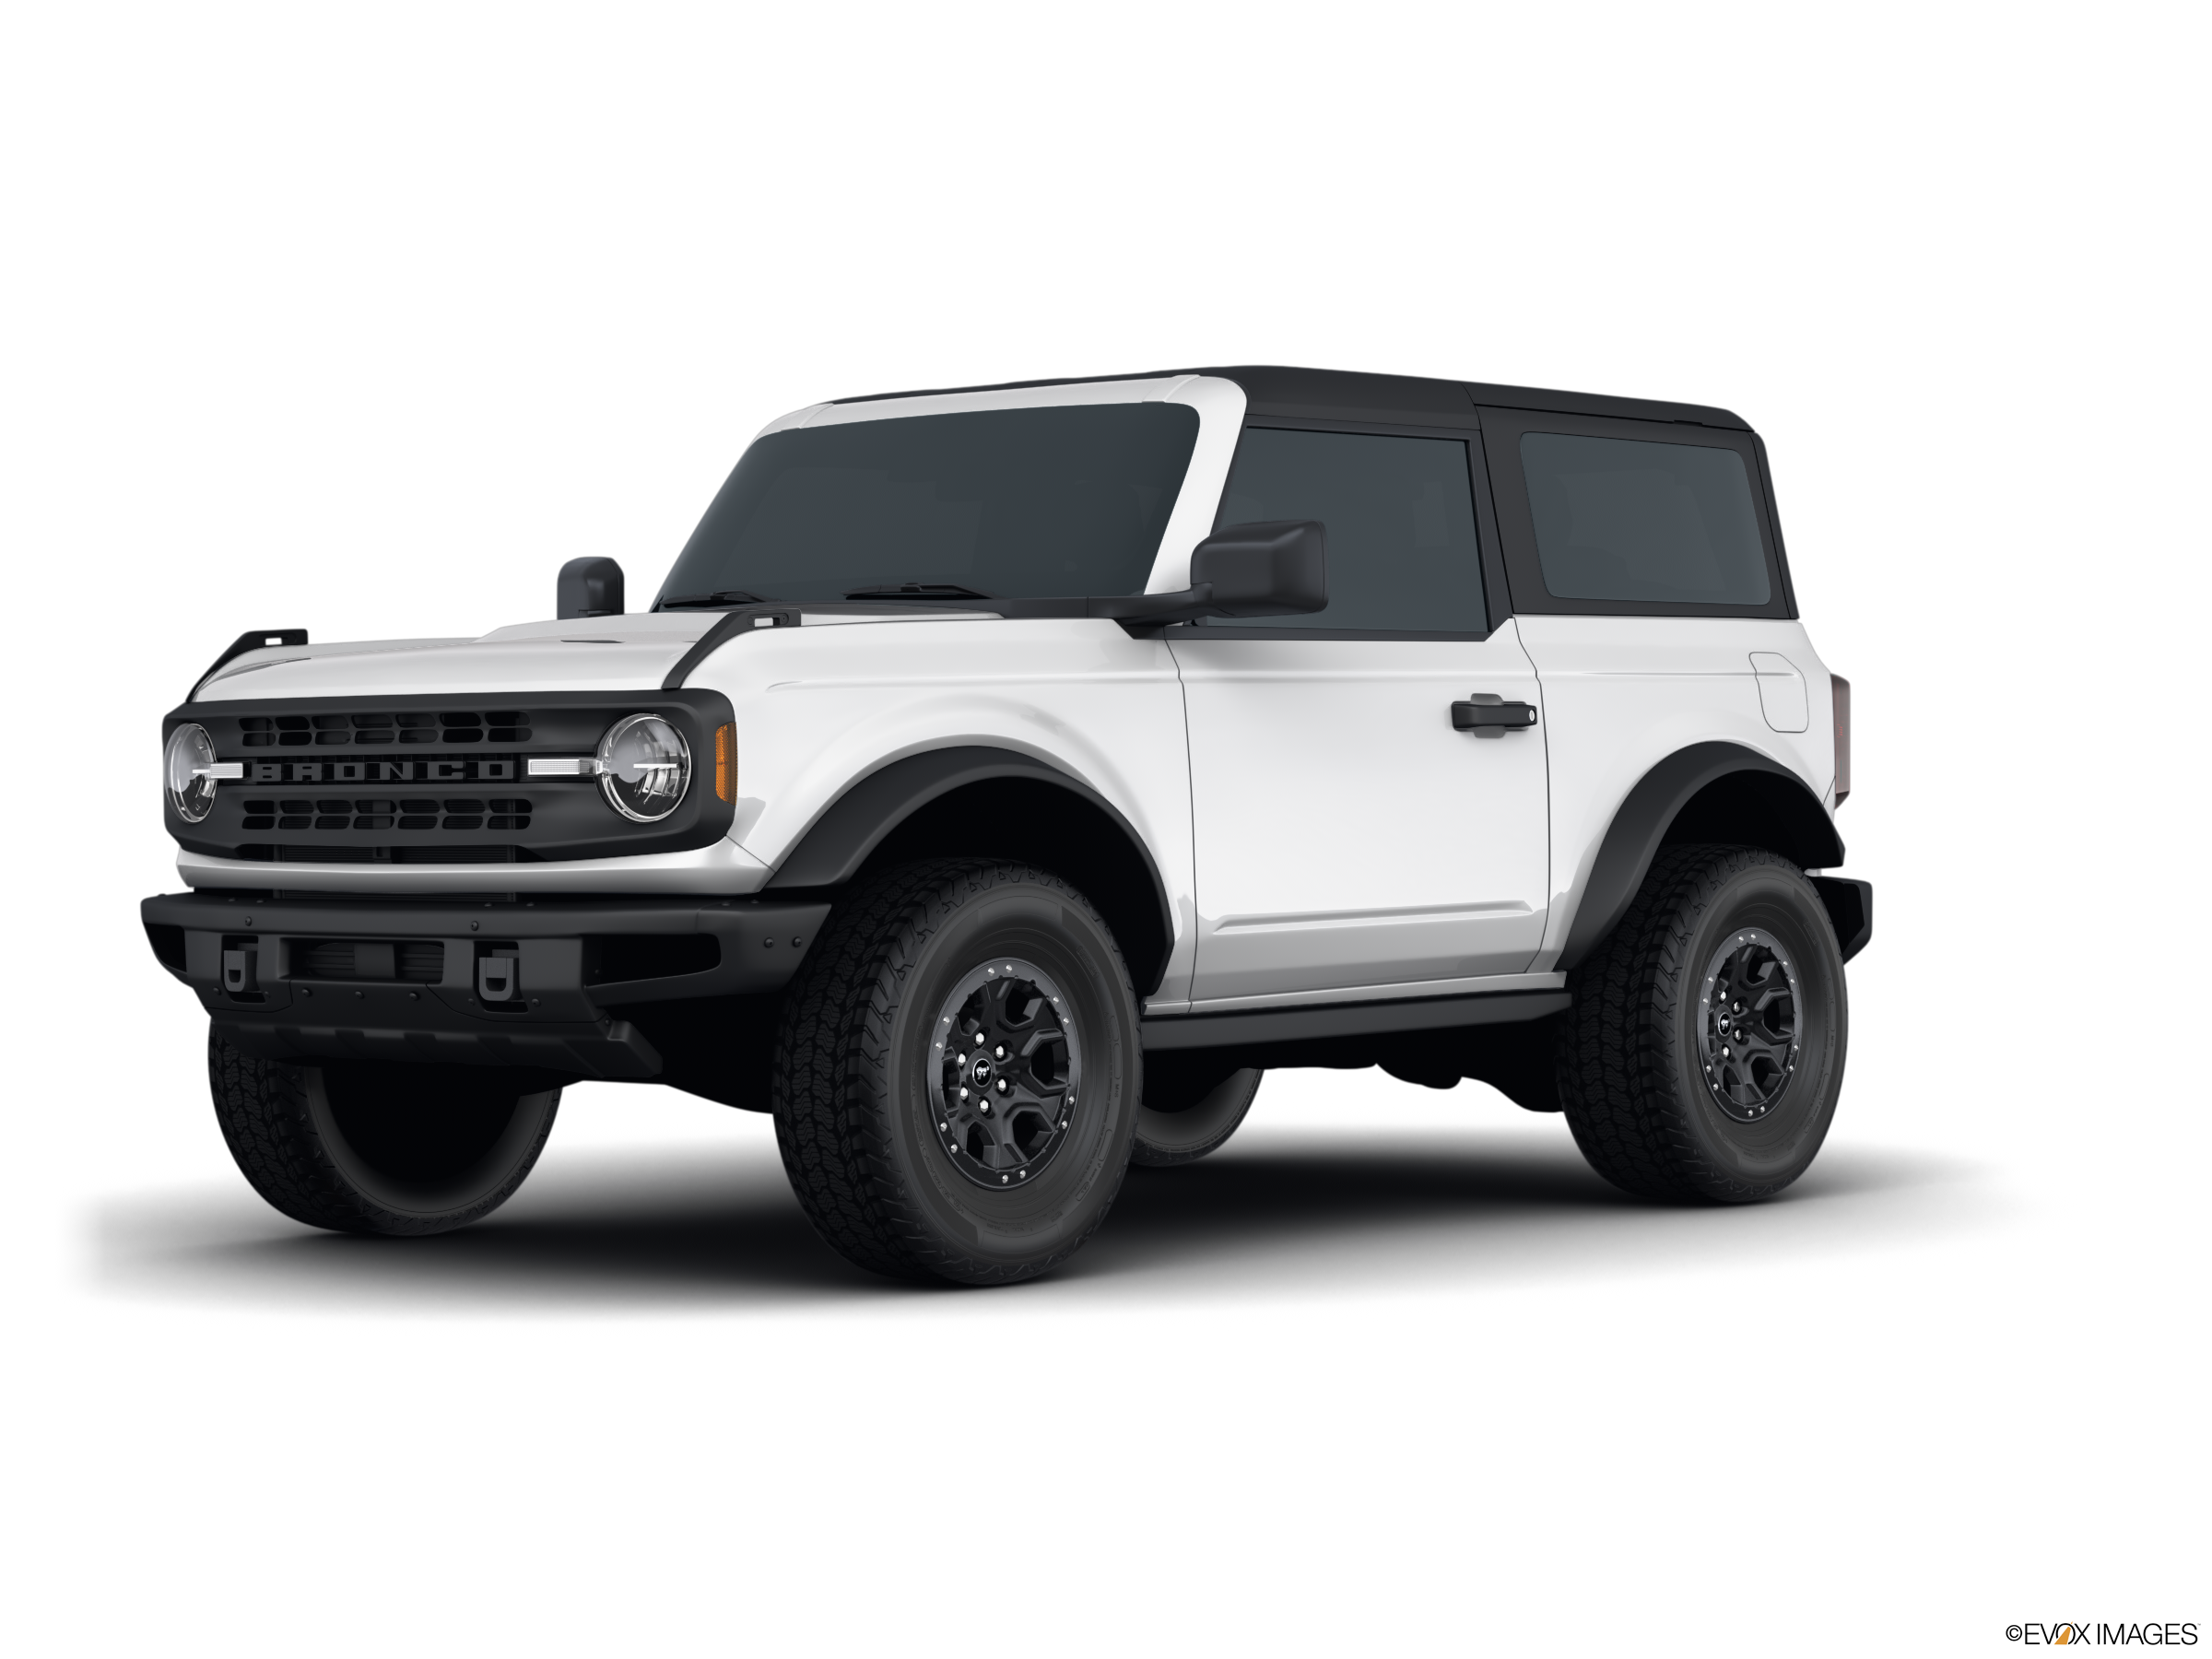 2021 ford bronco monthly payment - micha-janney